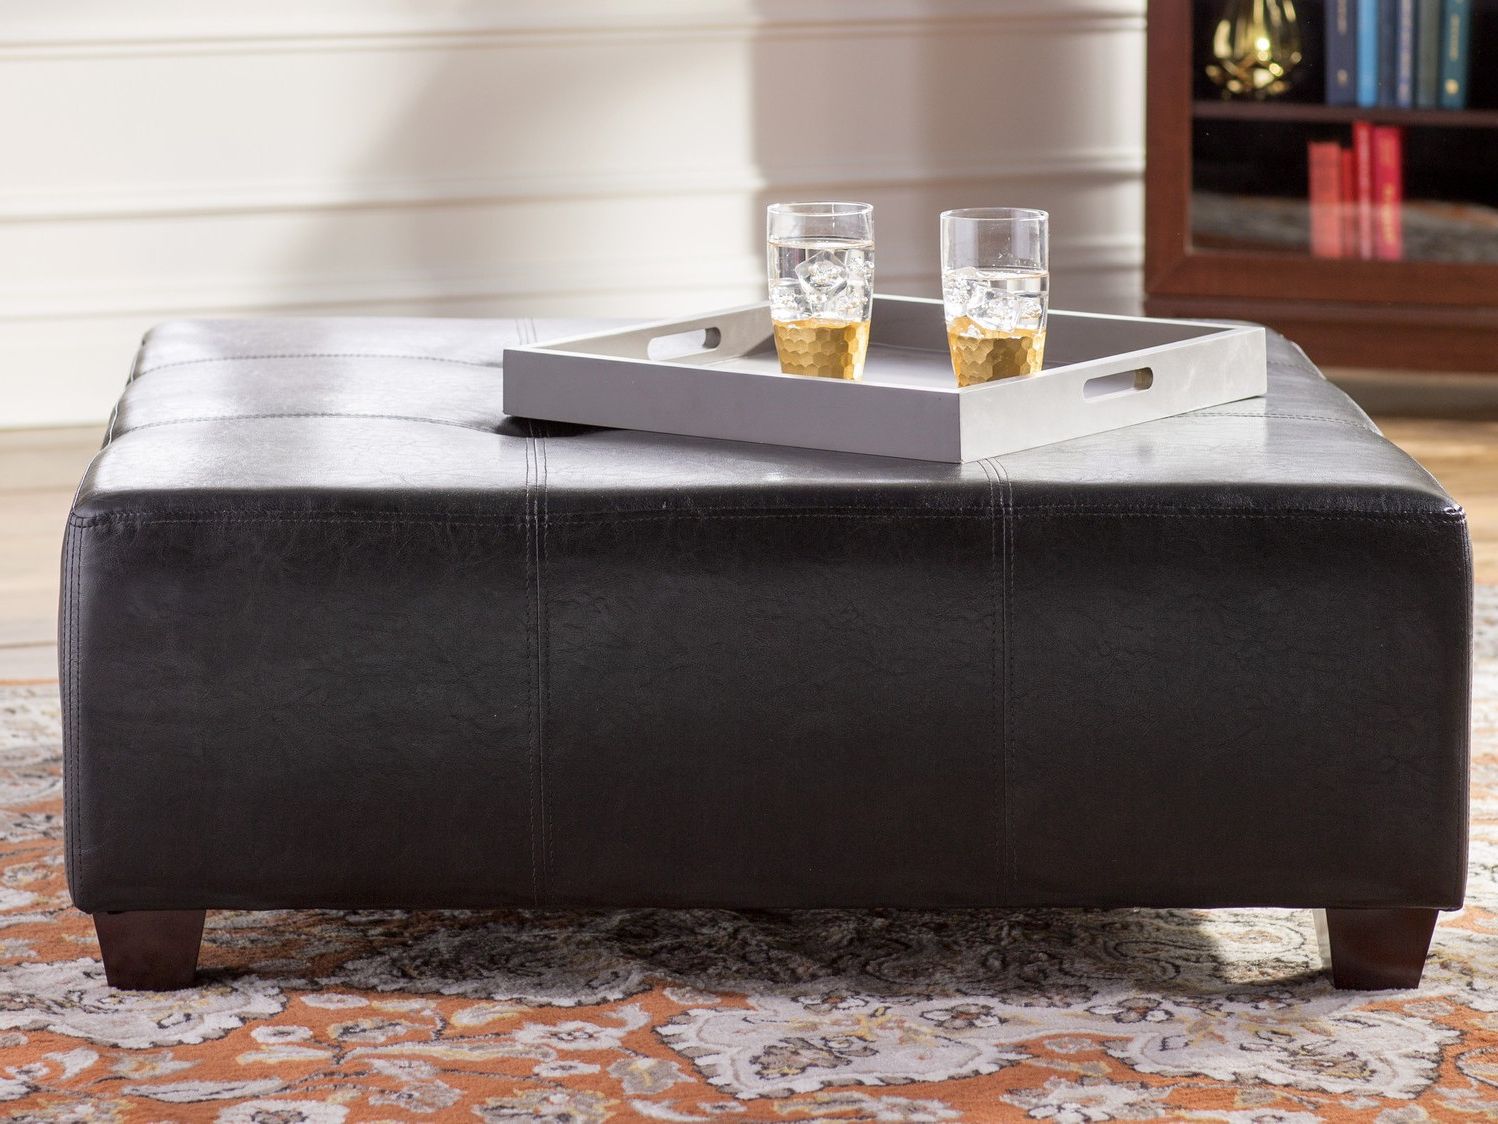 Aged Black Coffee Tables Throughout Well Known Black Upholstery Tufted Ottoman Coffee Table (View 10 of 10)